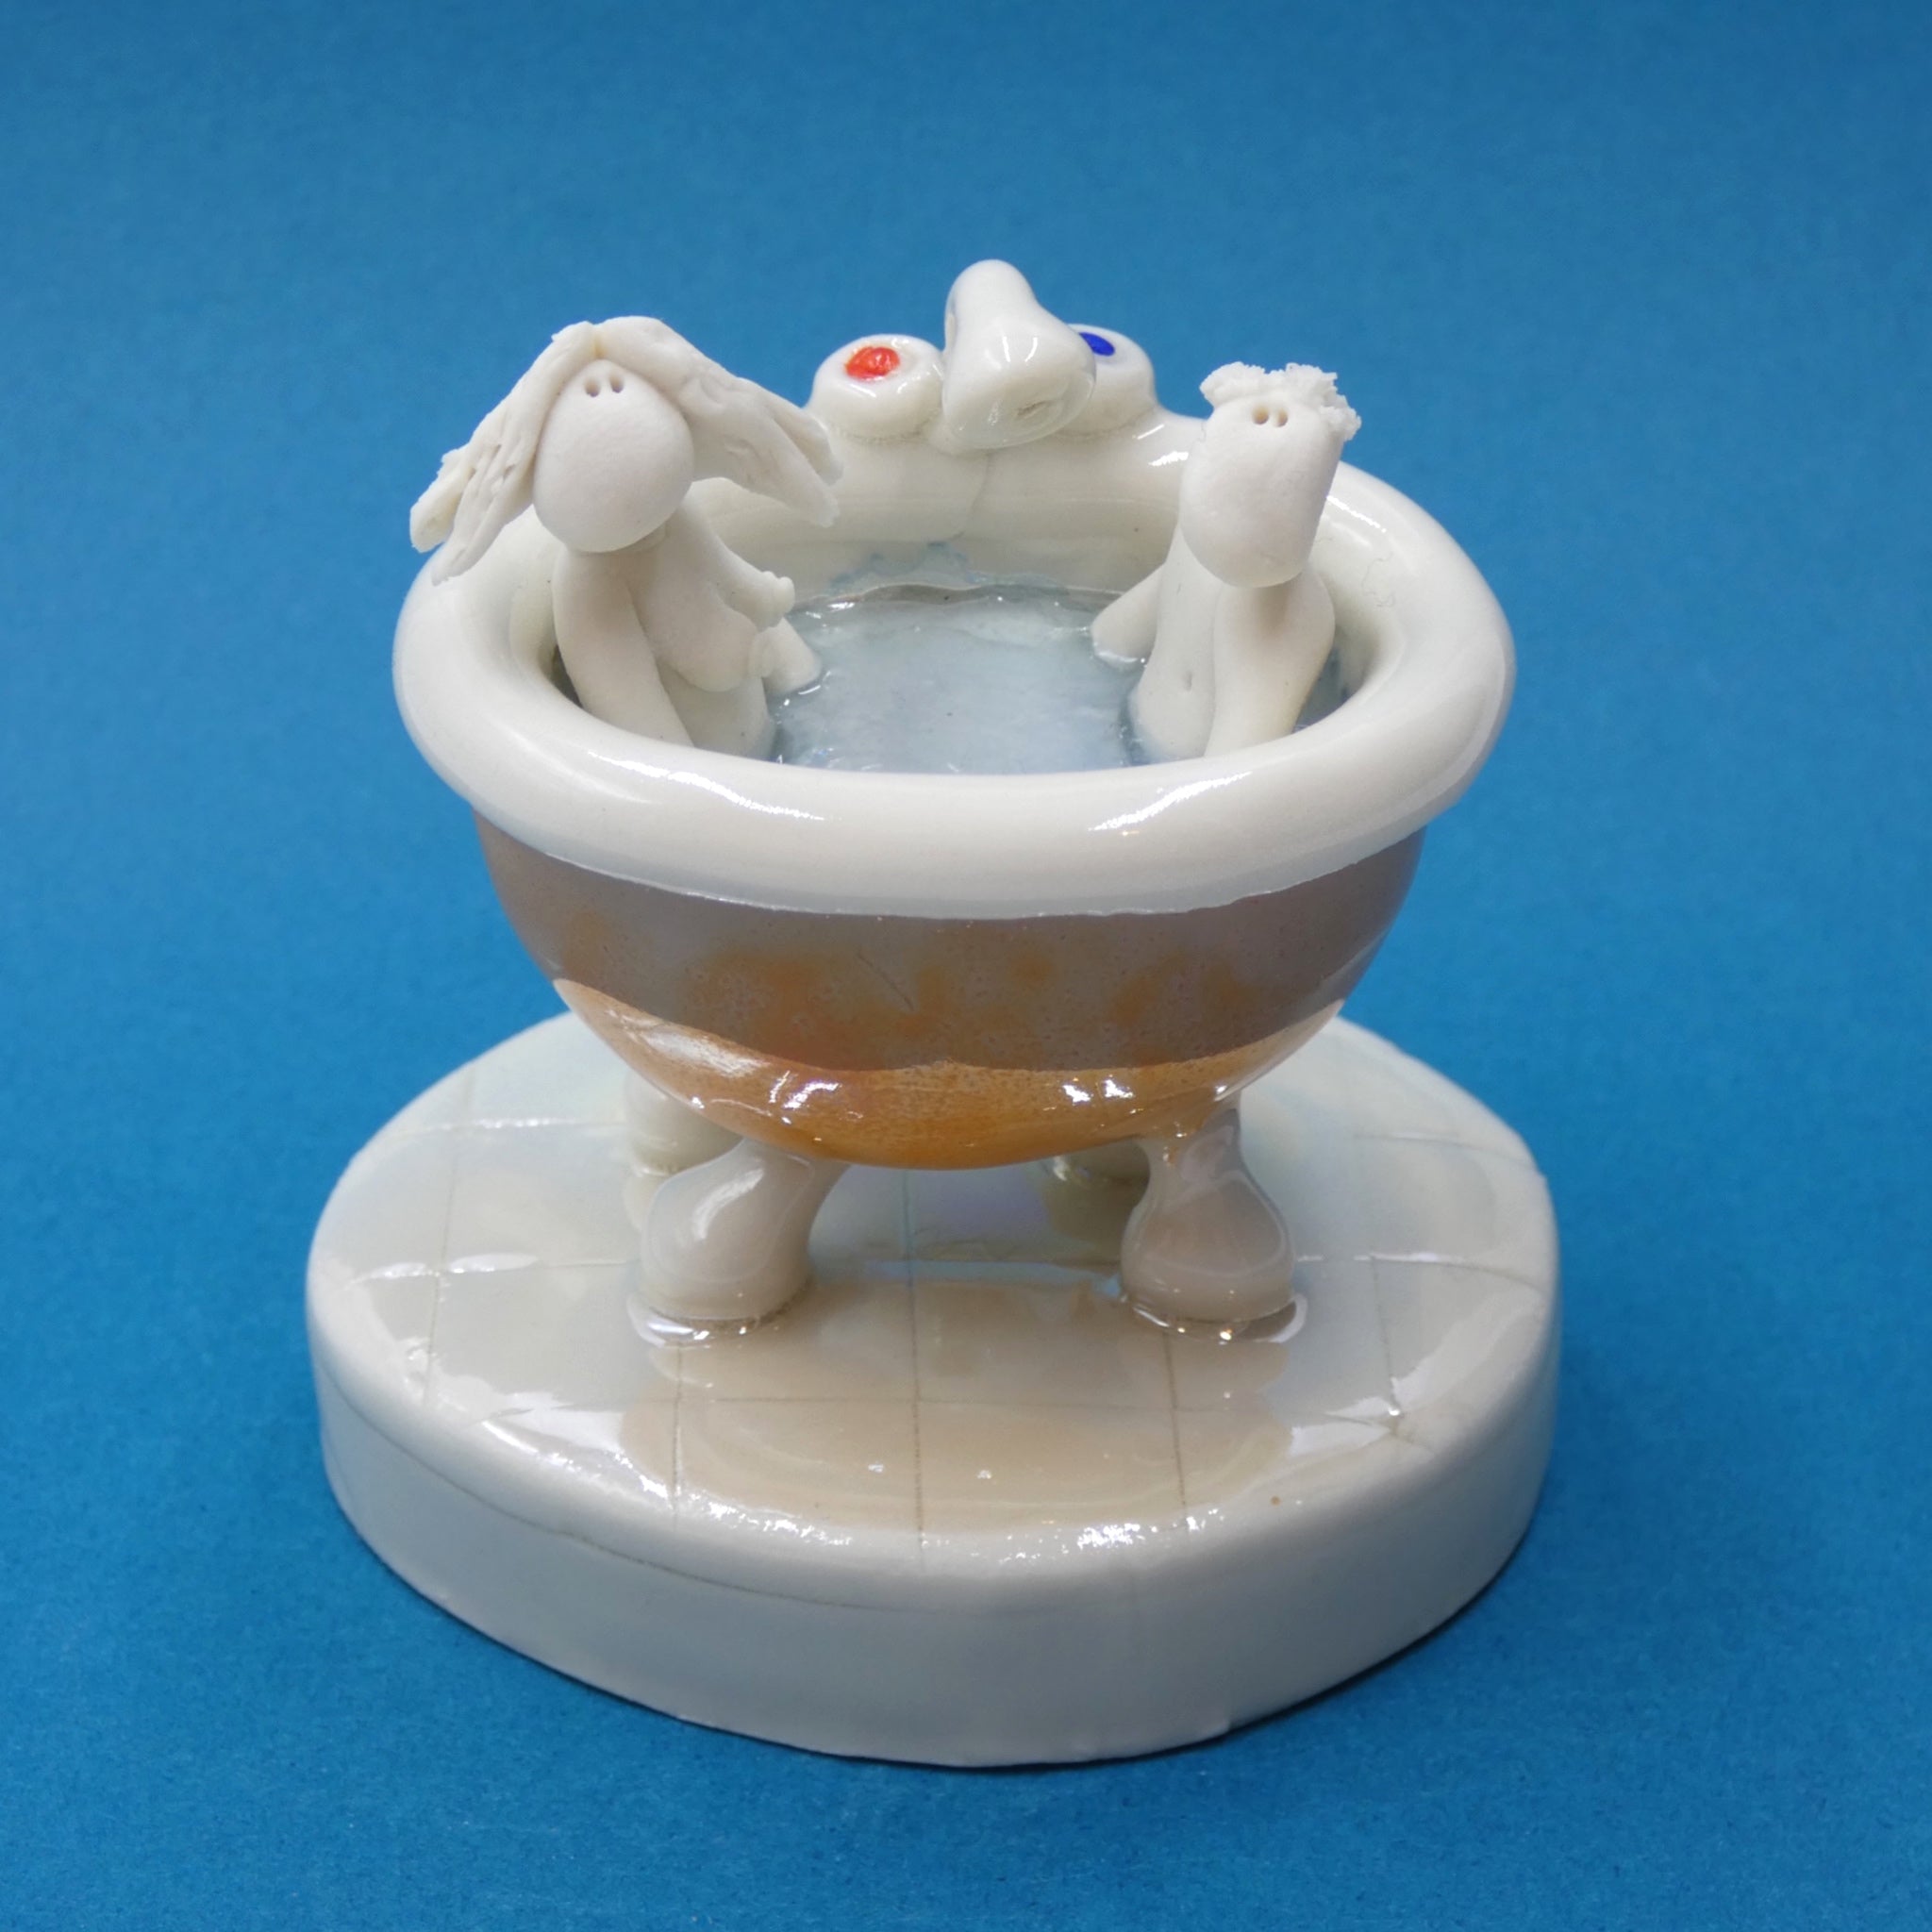 Porcelain sculpture of a couple in the bath by artist Andrew Bull